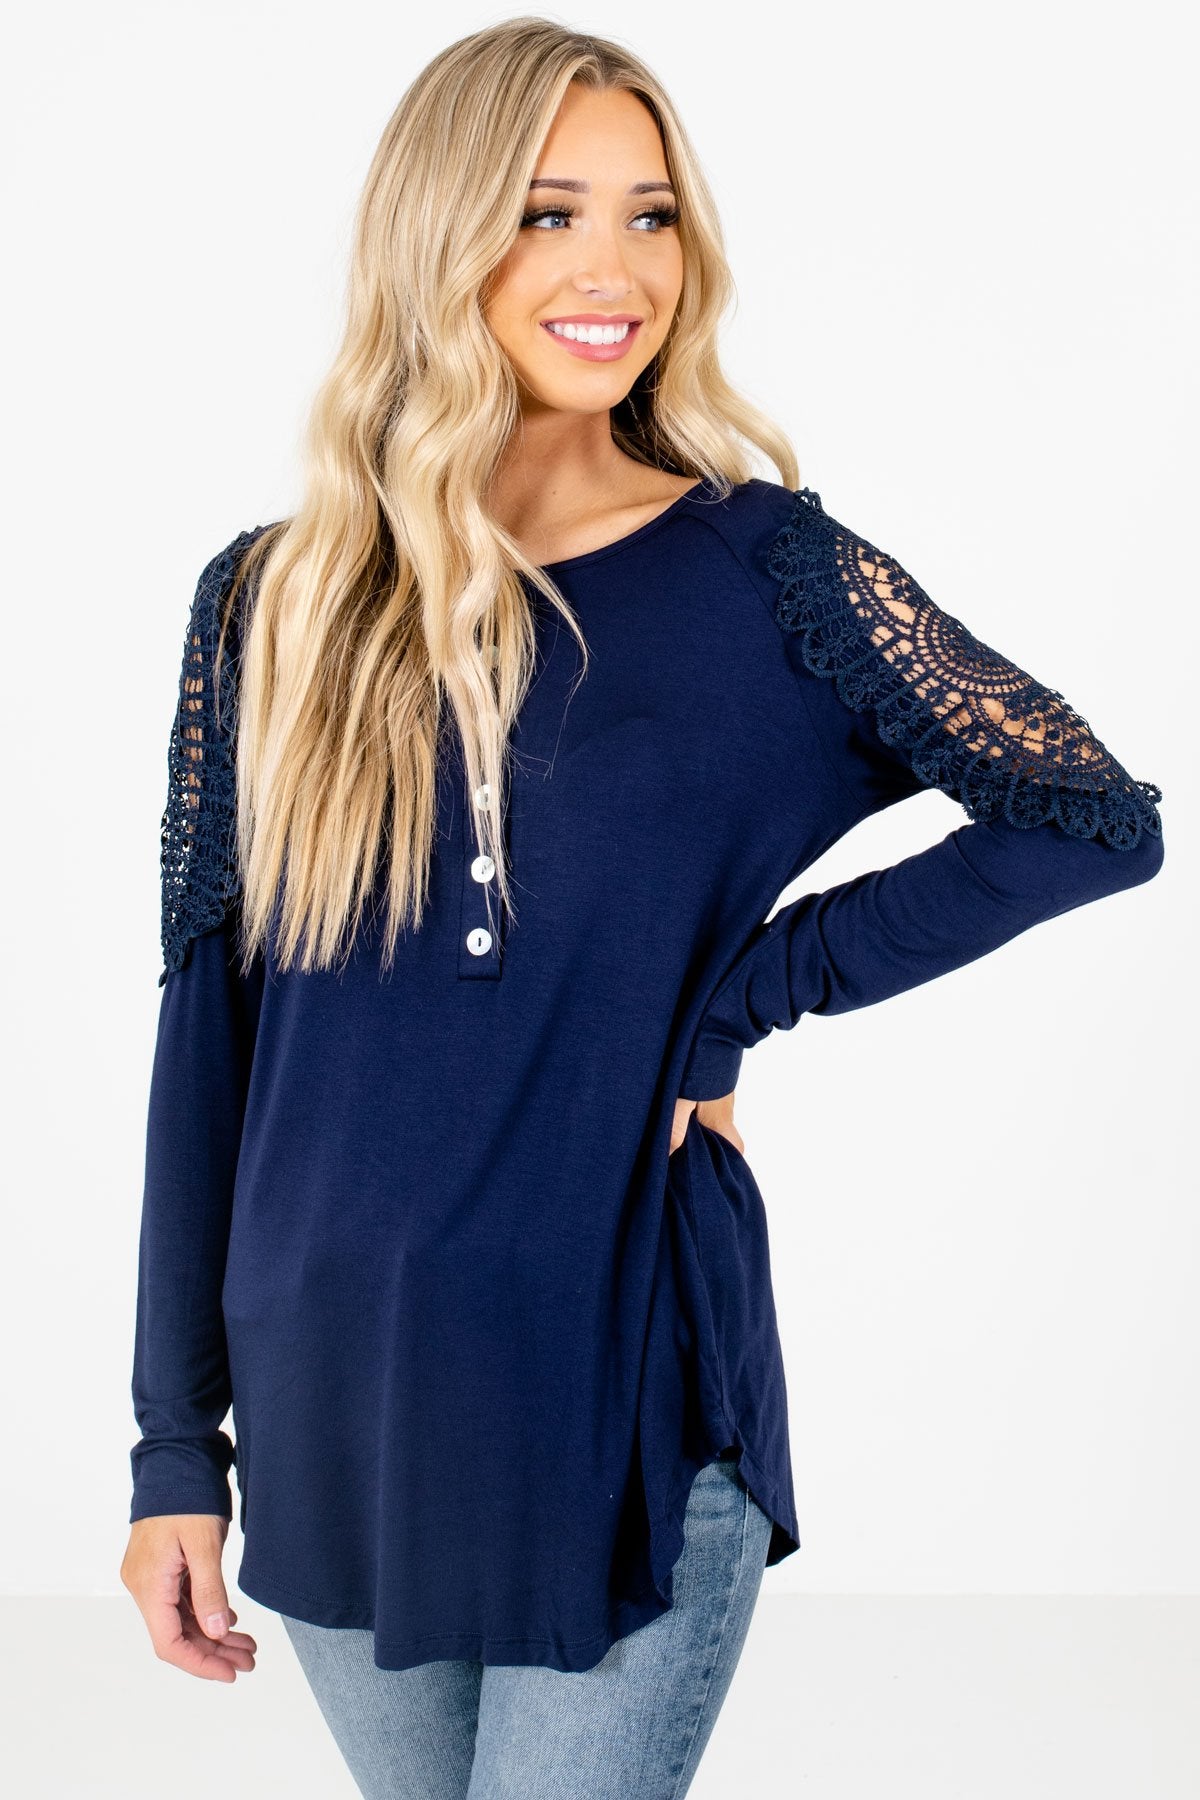 Women’s Navy Fall and Winter Boutique Clothing